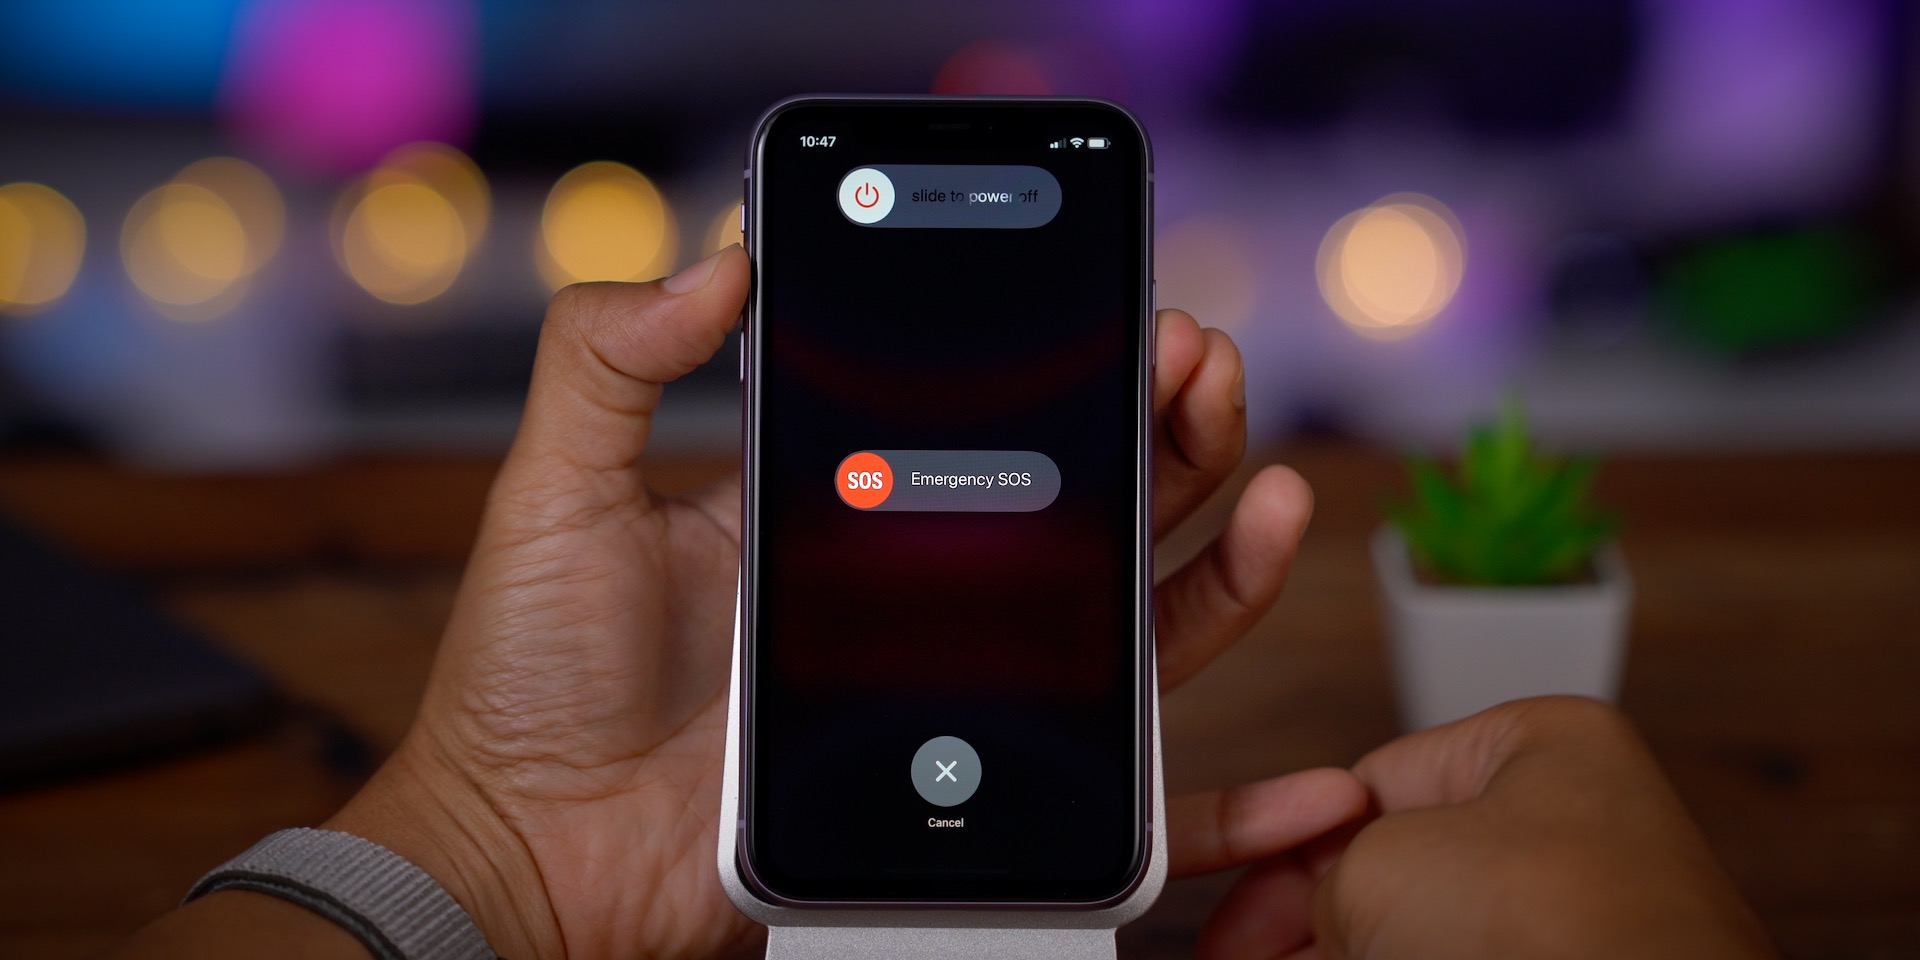 IPhone 11 Turn Off: Steps To Powering Down Your Phone